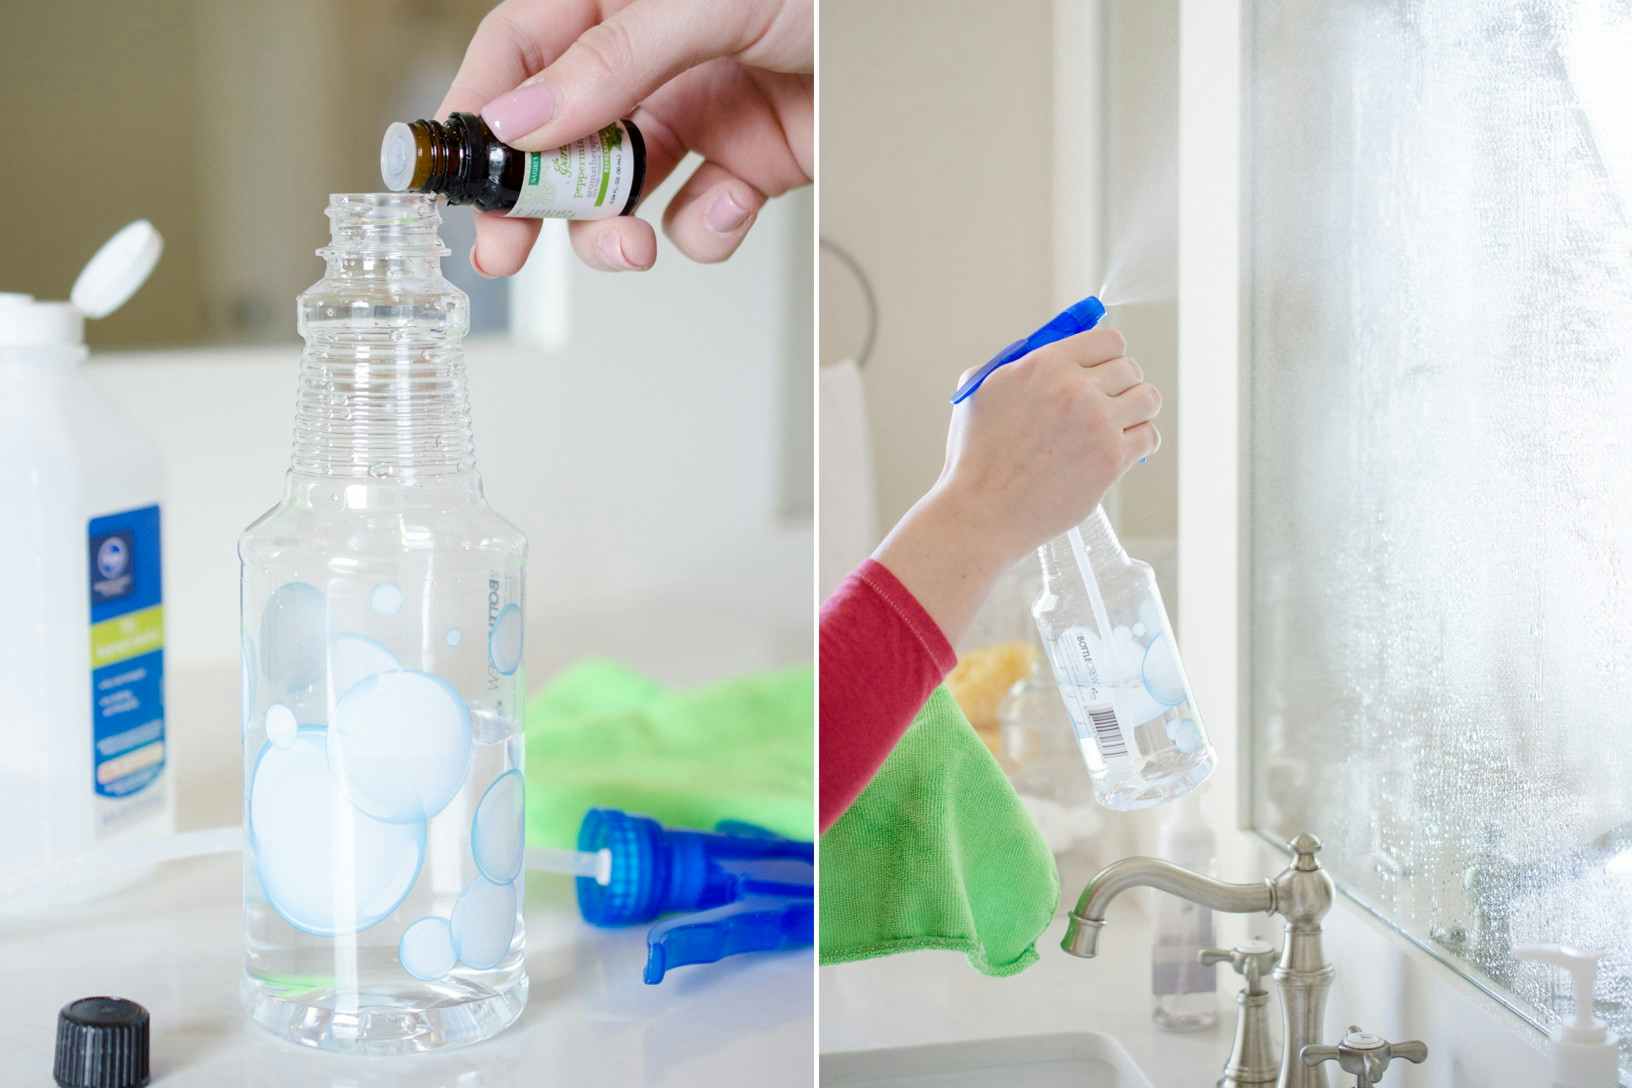 Make glass and mirror cleaner.